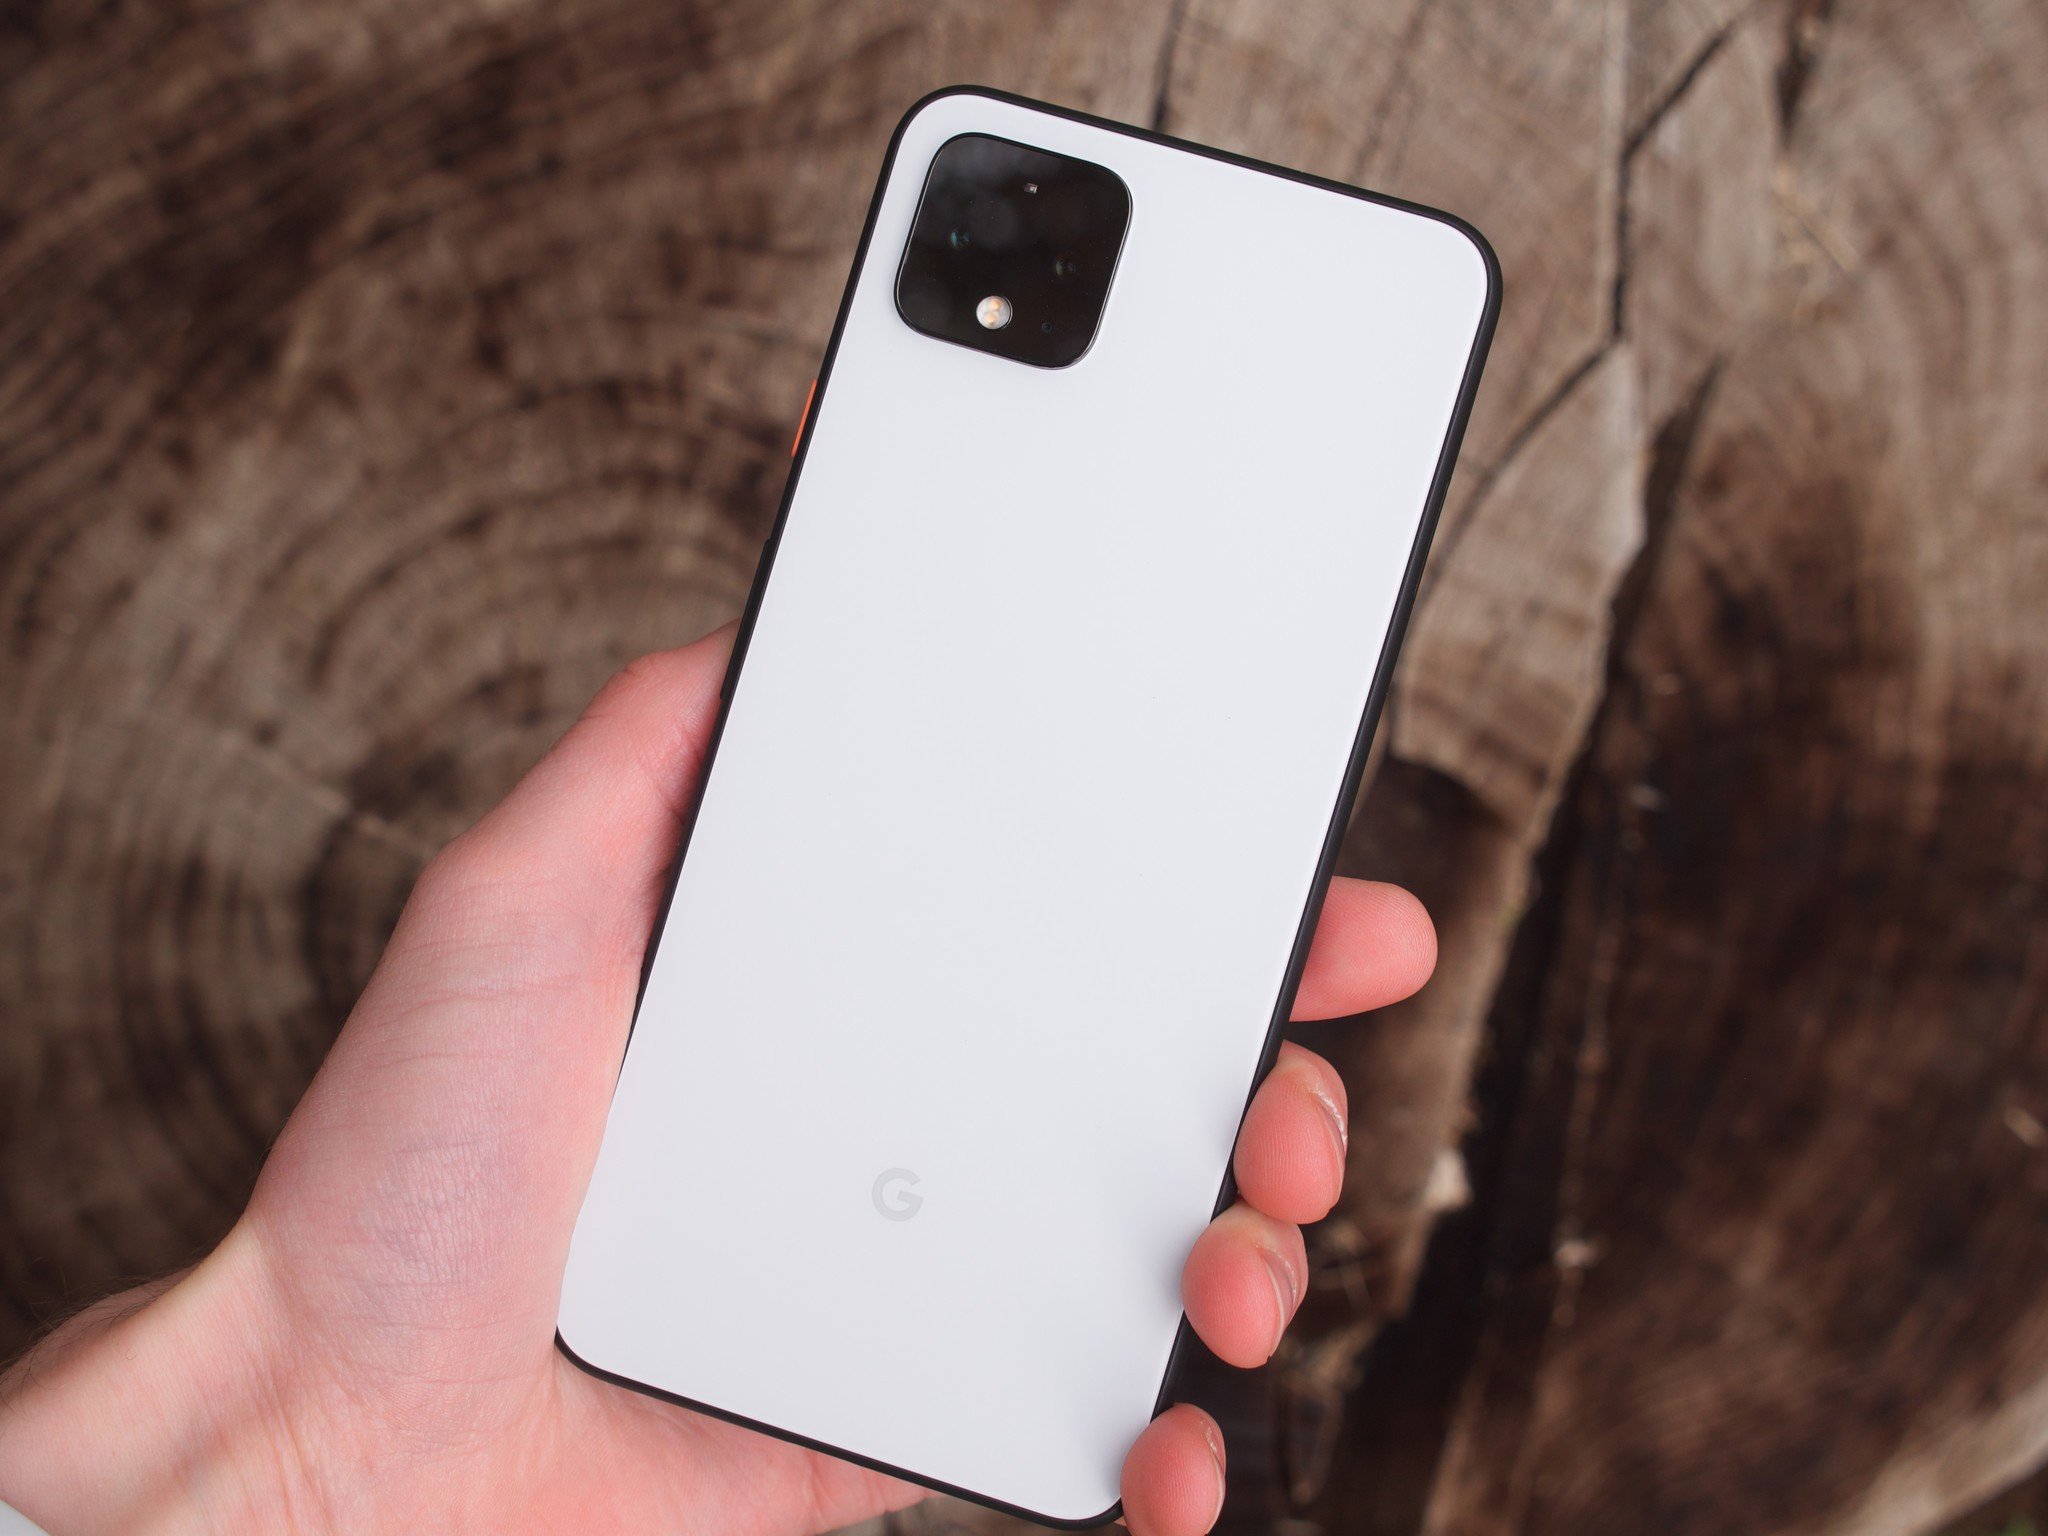 Holding a Clearly White Pixel 4 XL